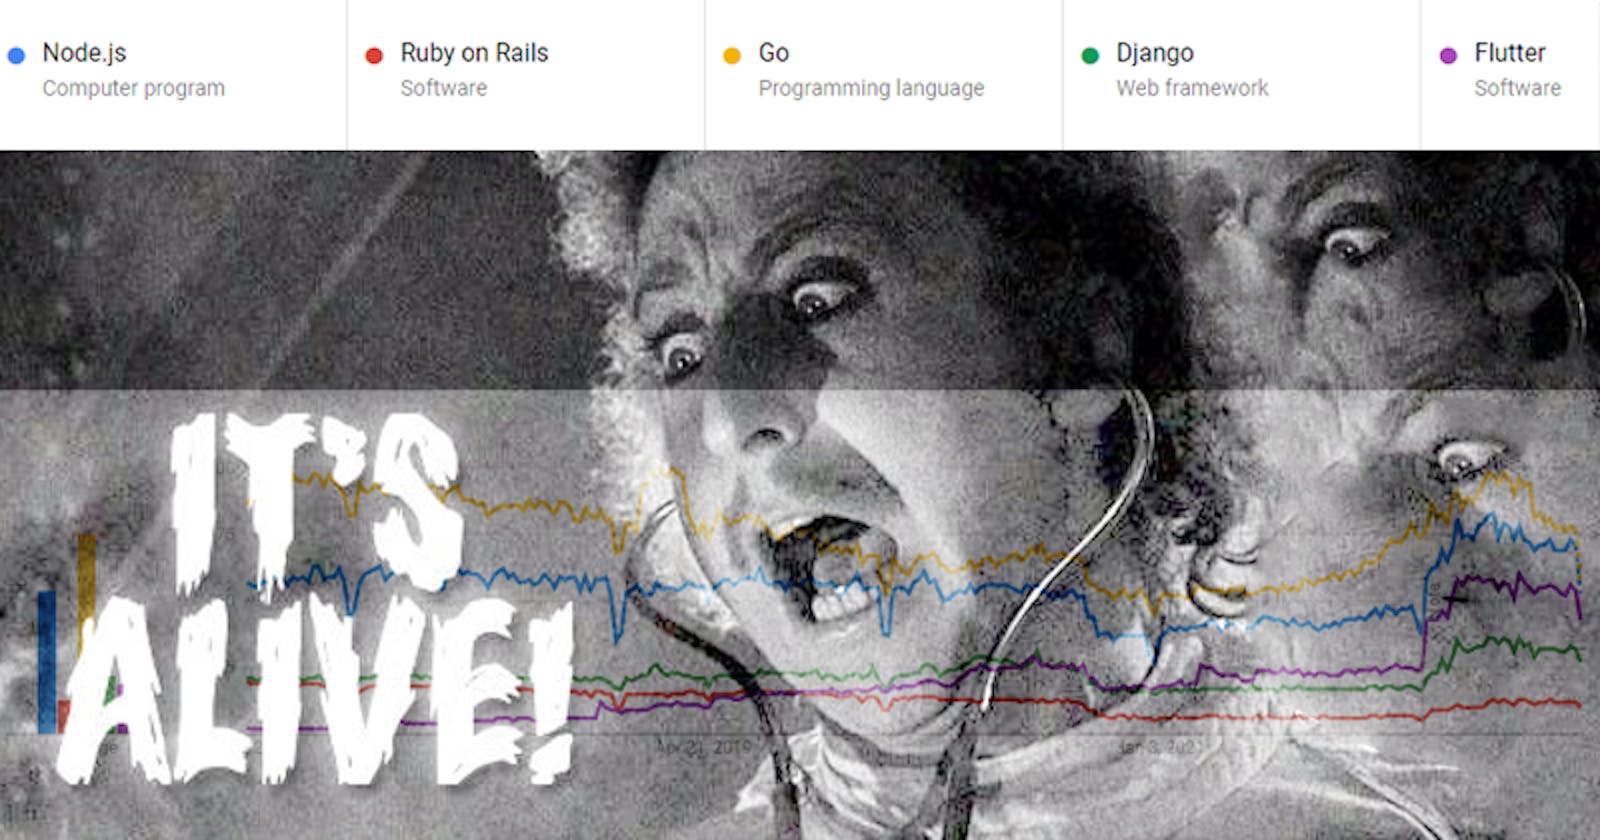 Discovering Ruby on Rails: is it dead or alive?